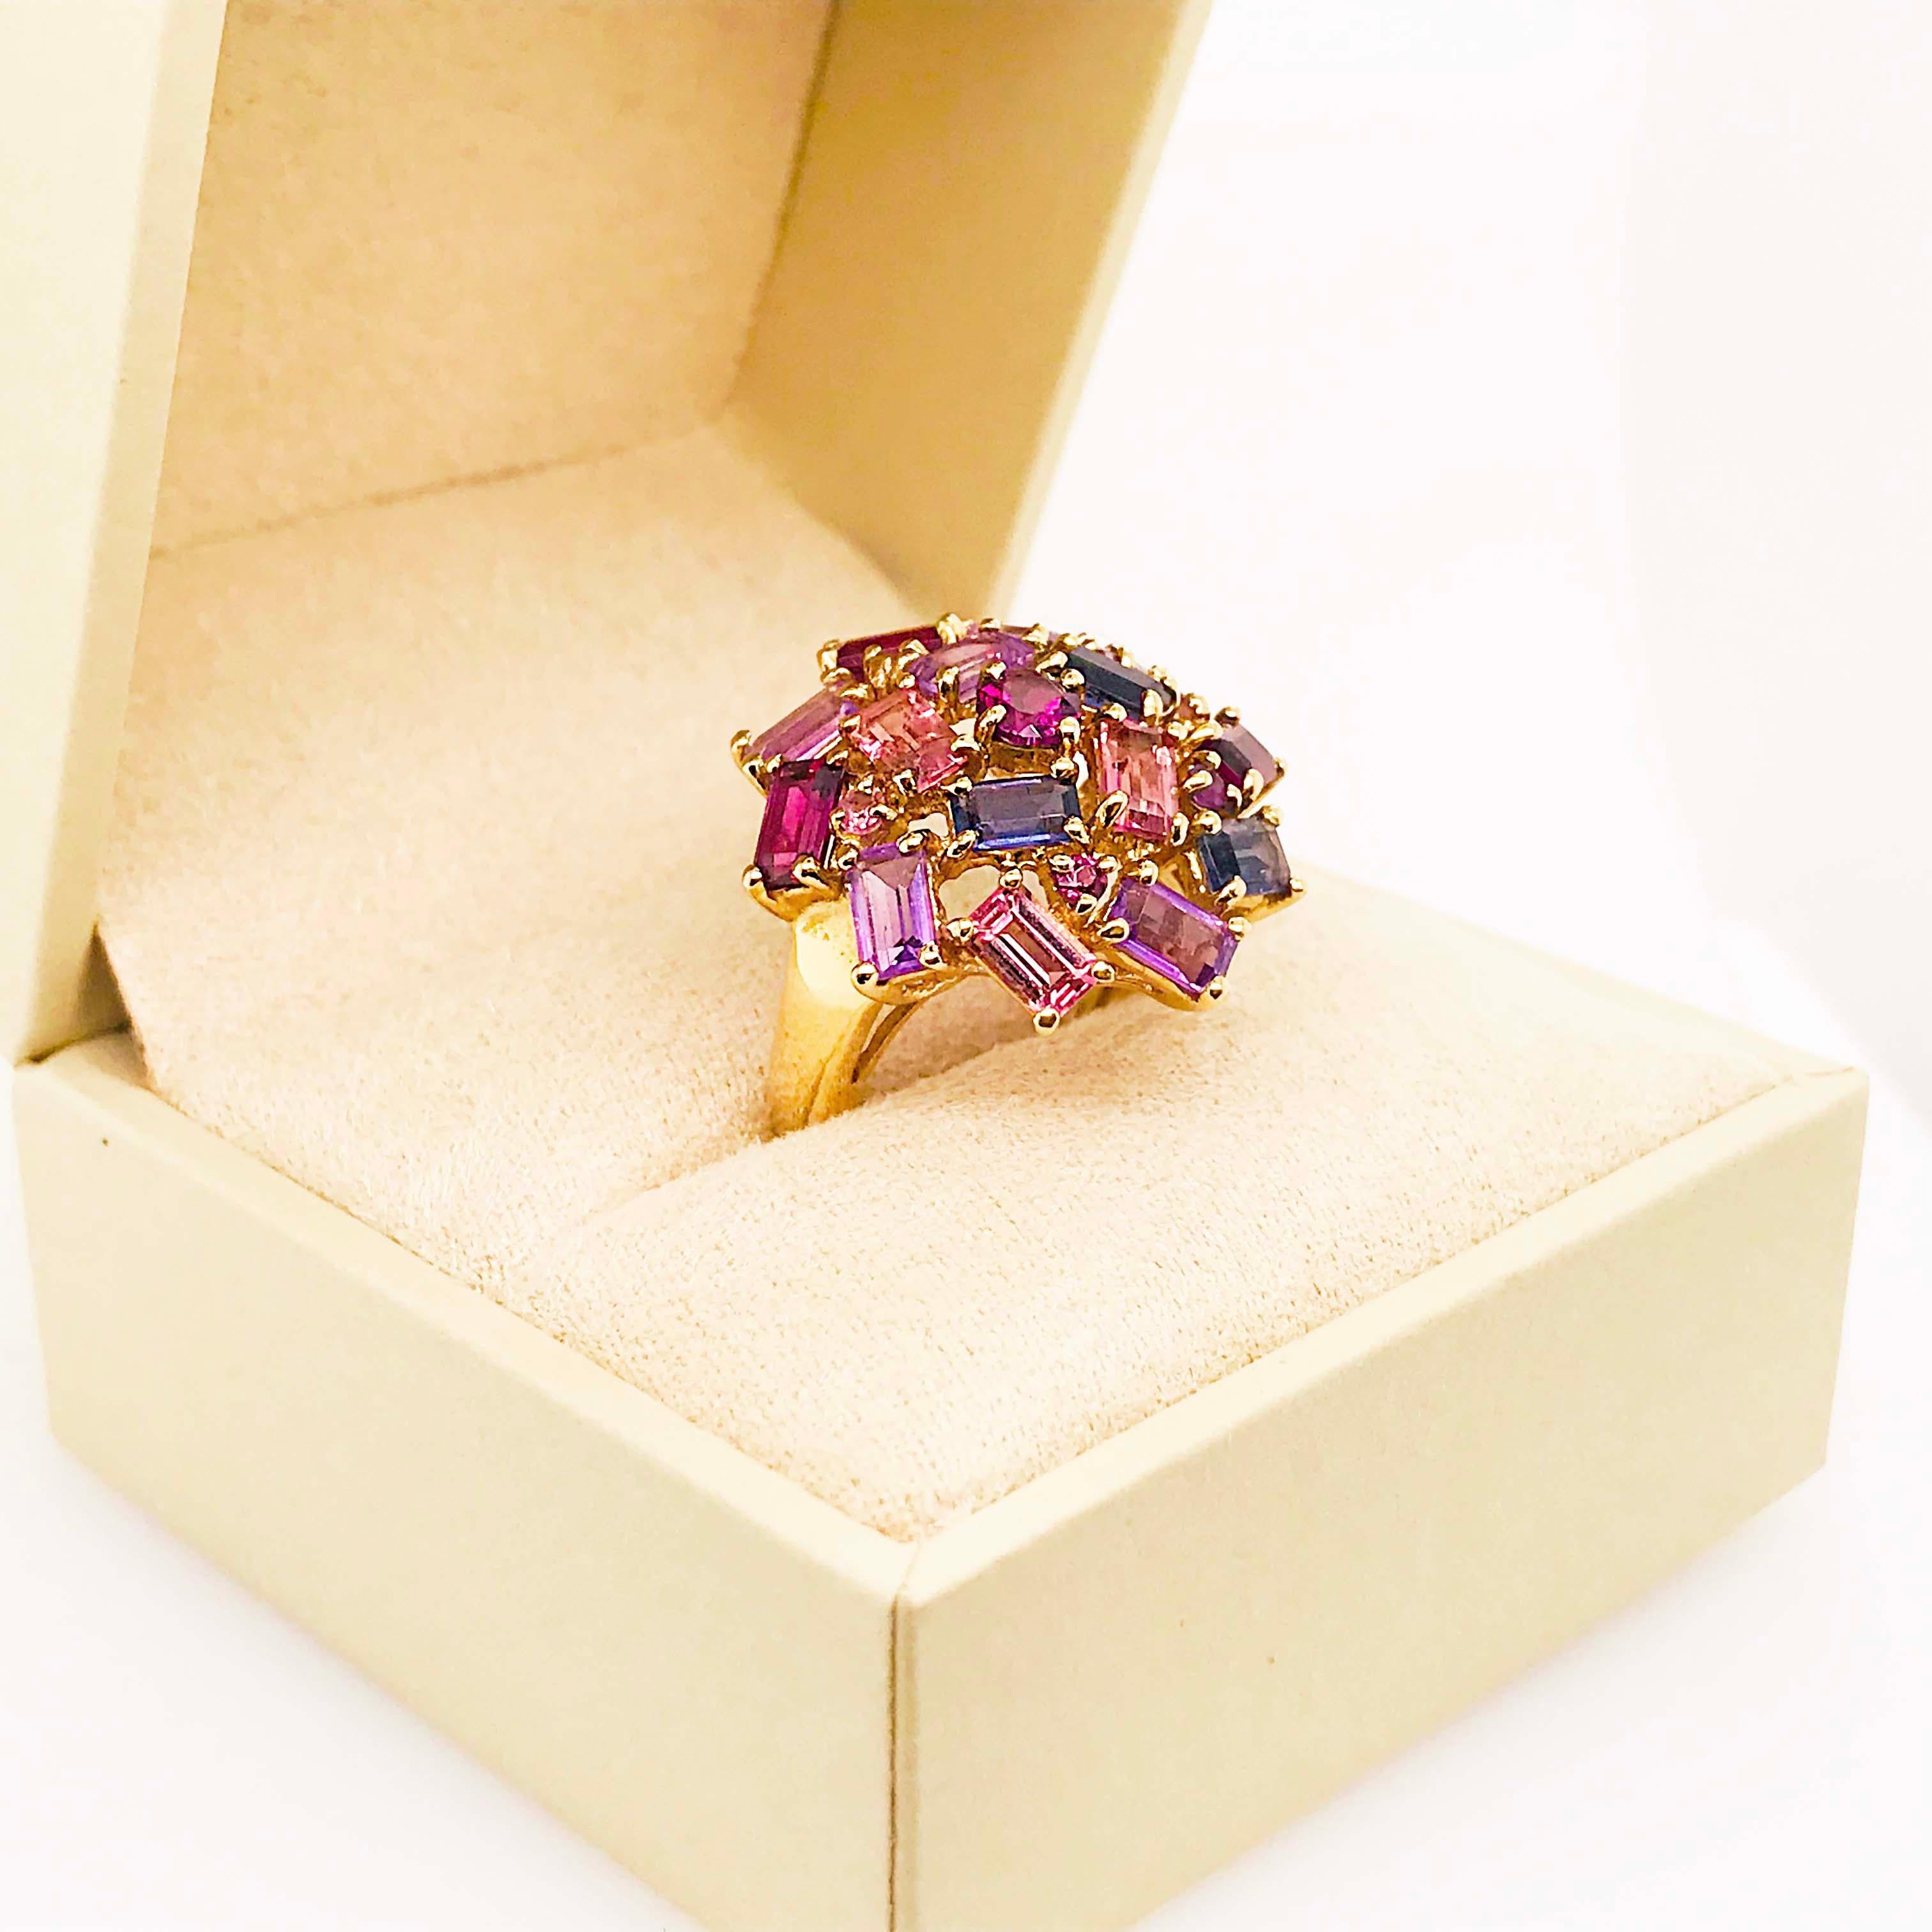 Amethyst, Garnet and Tourmaline Cluster Fashion Cocktail Ring in 14k Yellow Gold 2